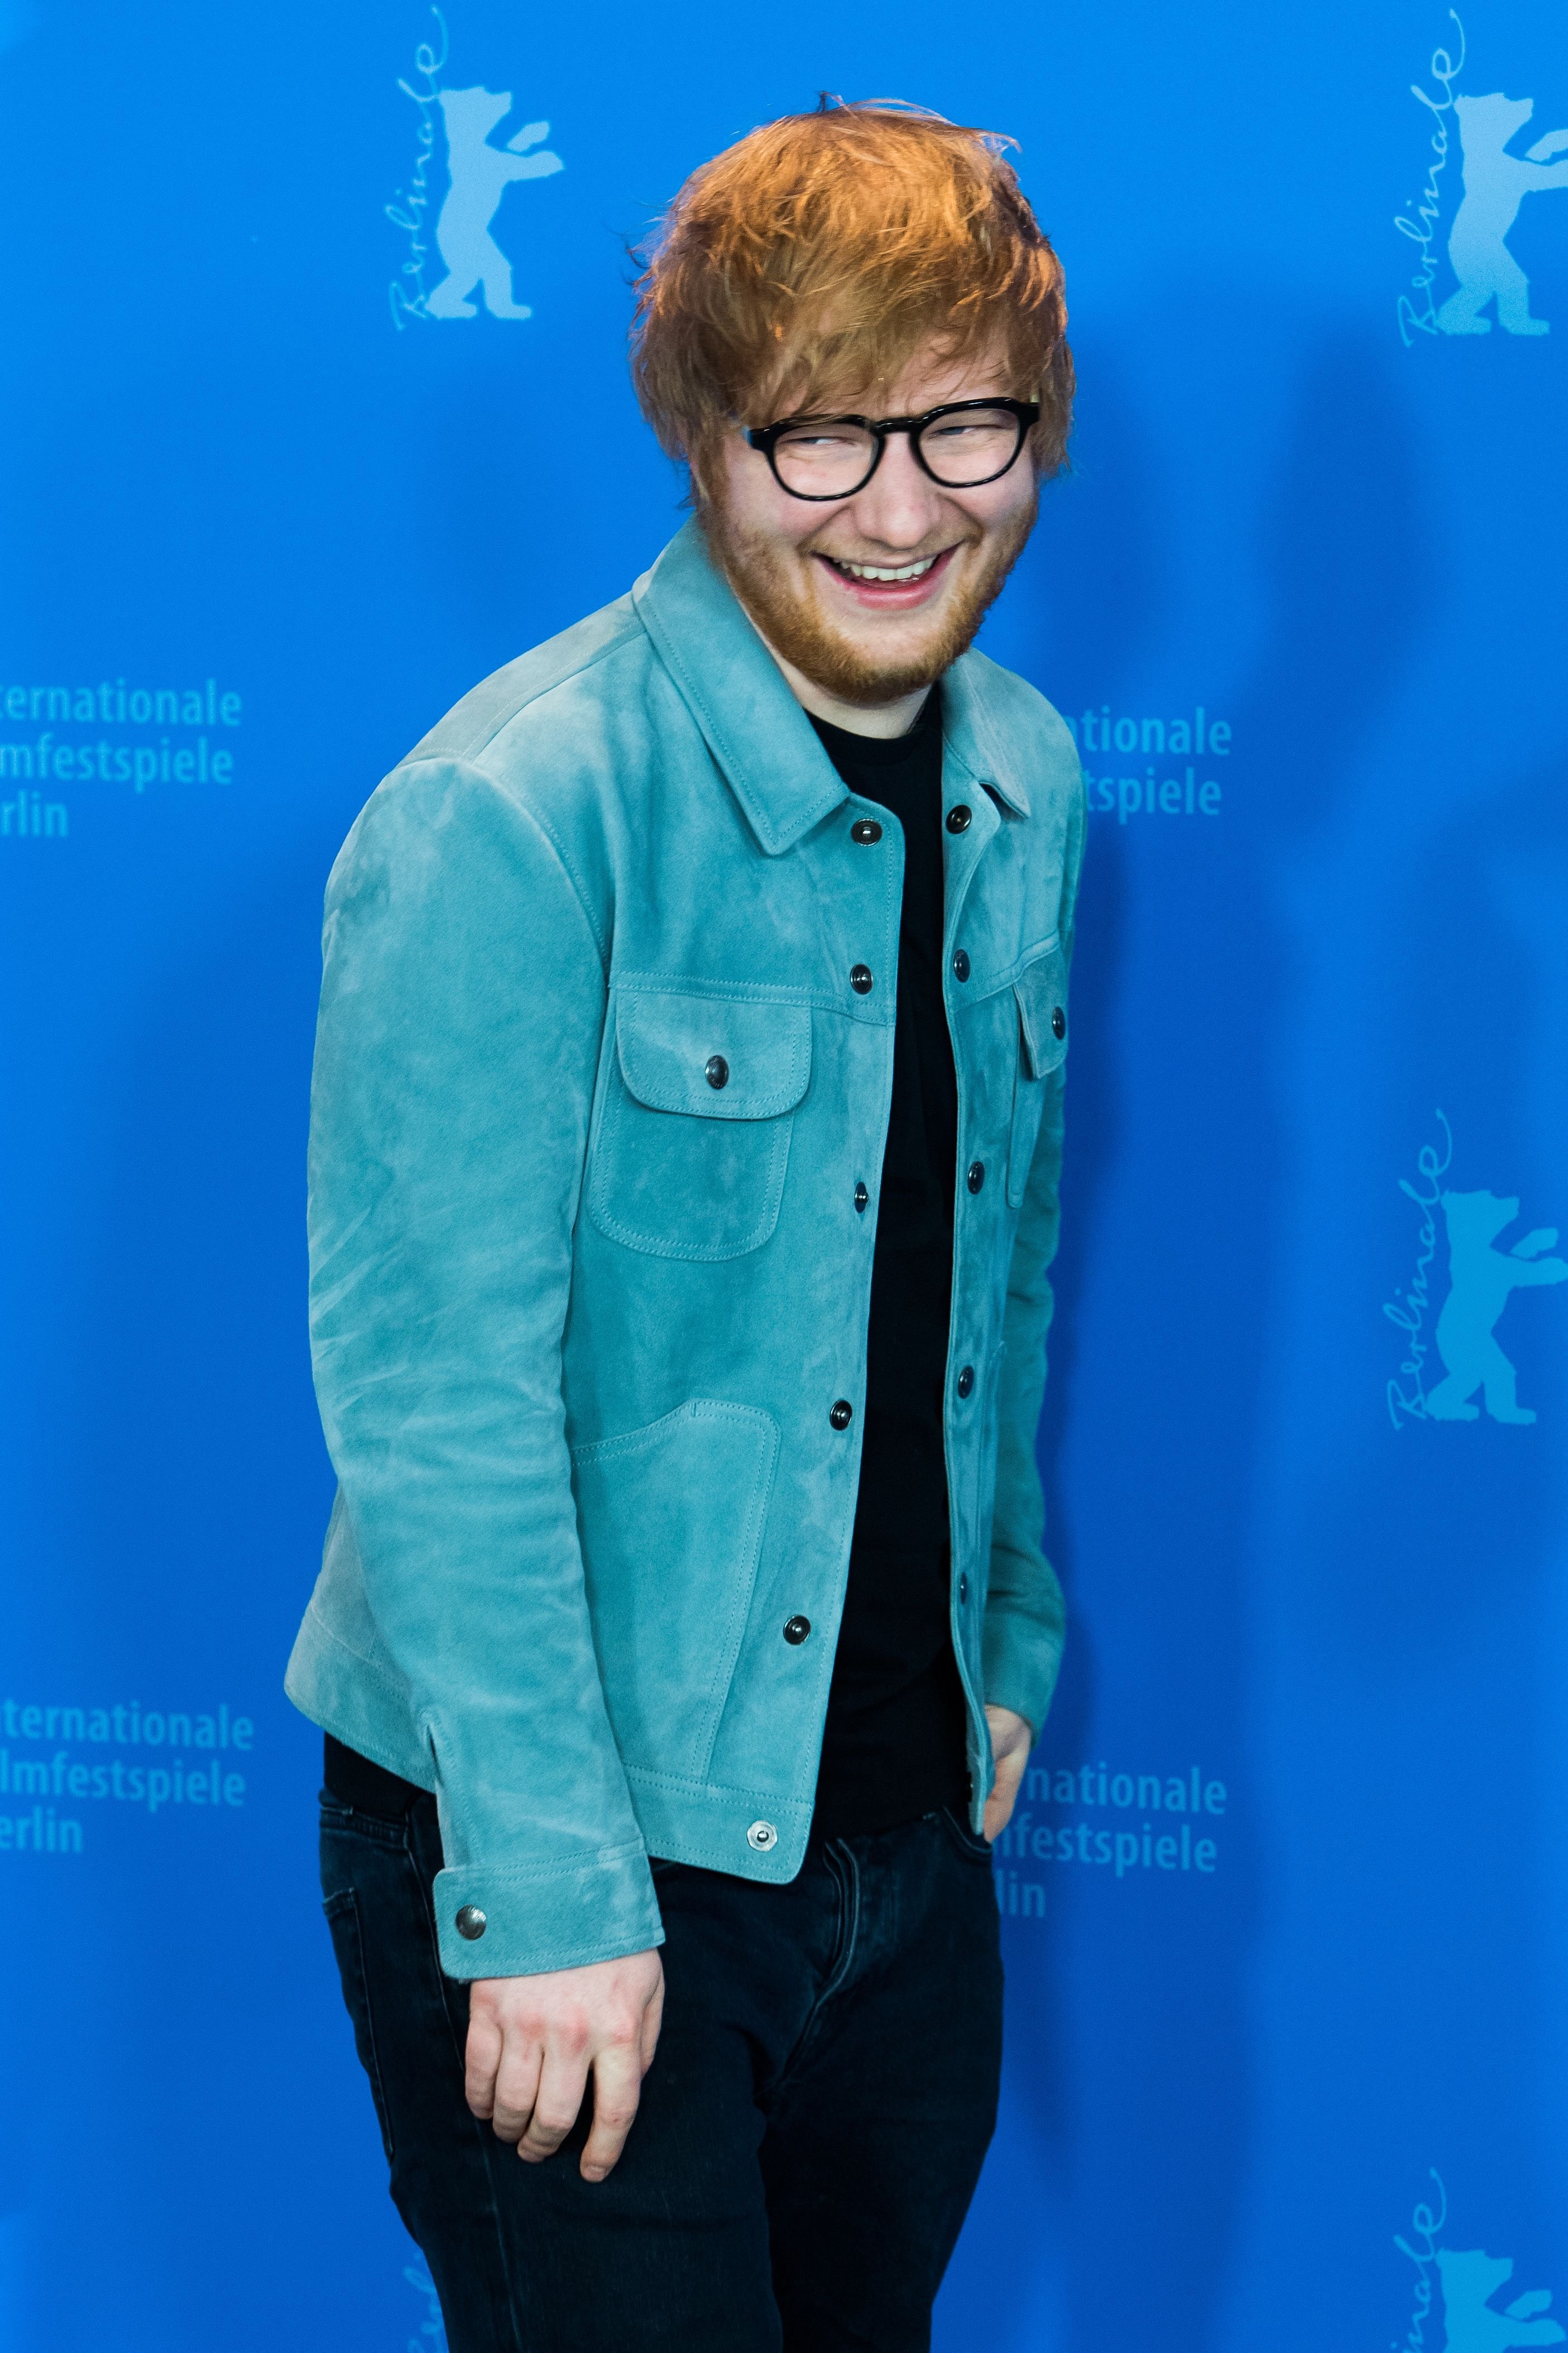 Ed Sheeran poses at the 'Songwriter' photo call during the 68th Berlinale International Film Festival Berlin at Grand Hyatt Hotel on February 23, 2018 in Berlin, Germany. | Source: Getty Images